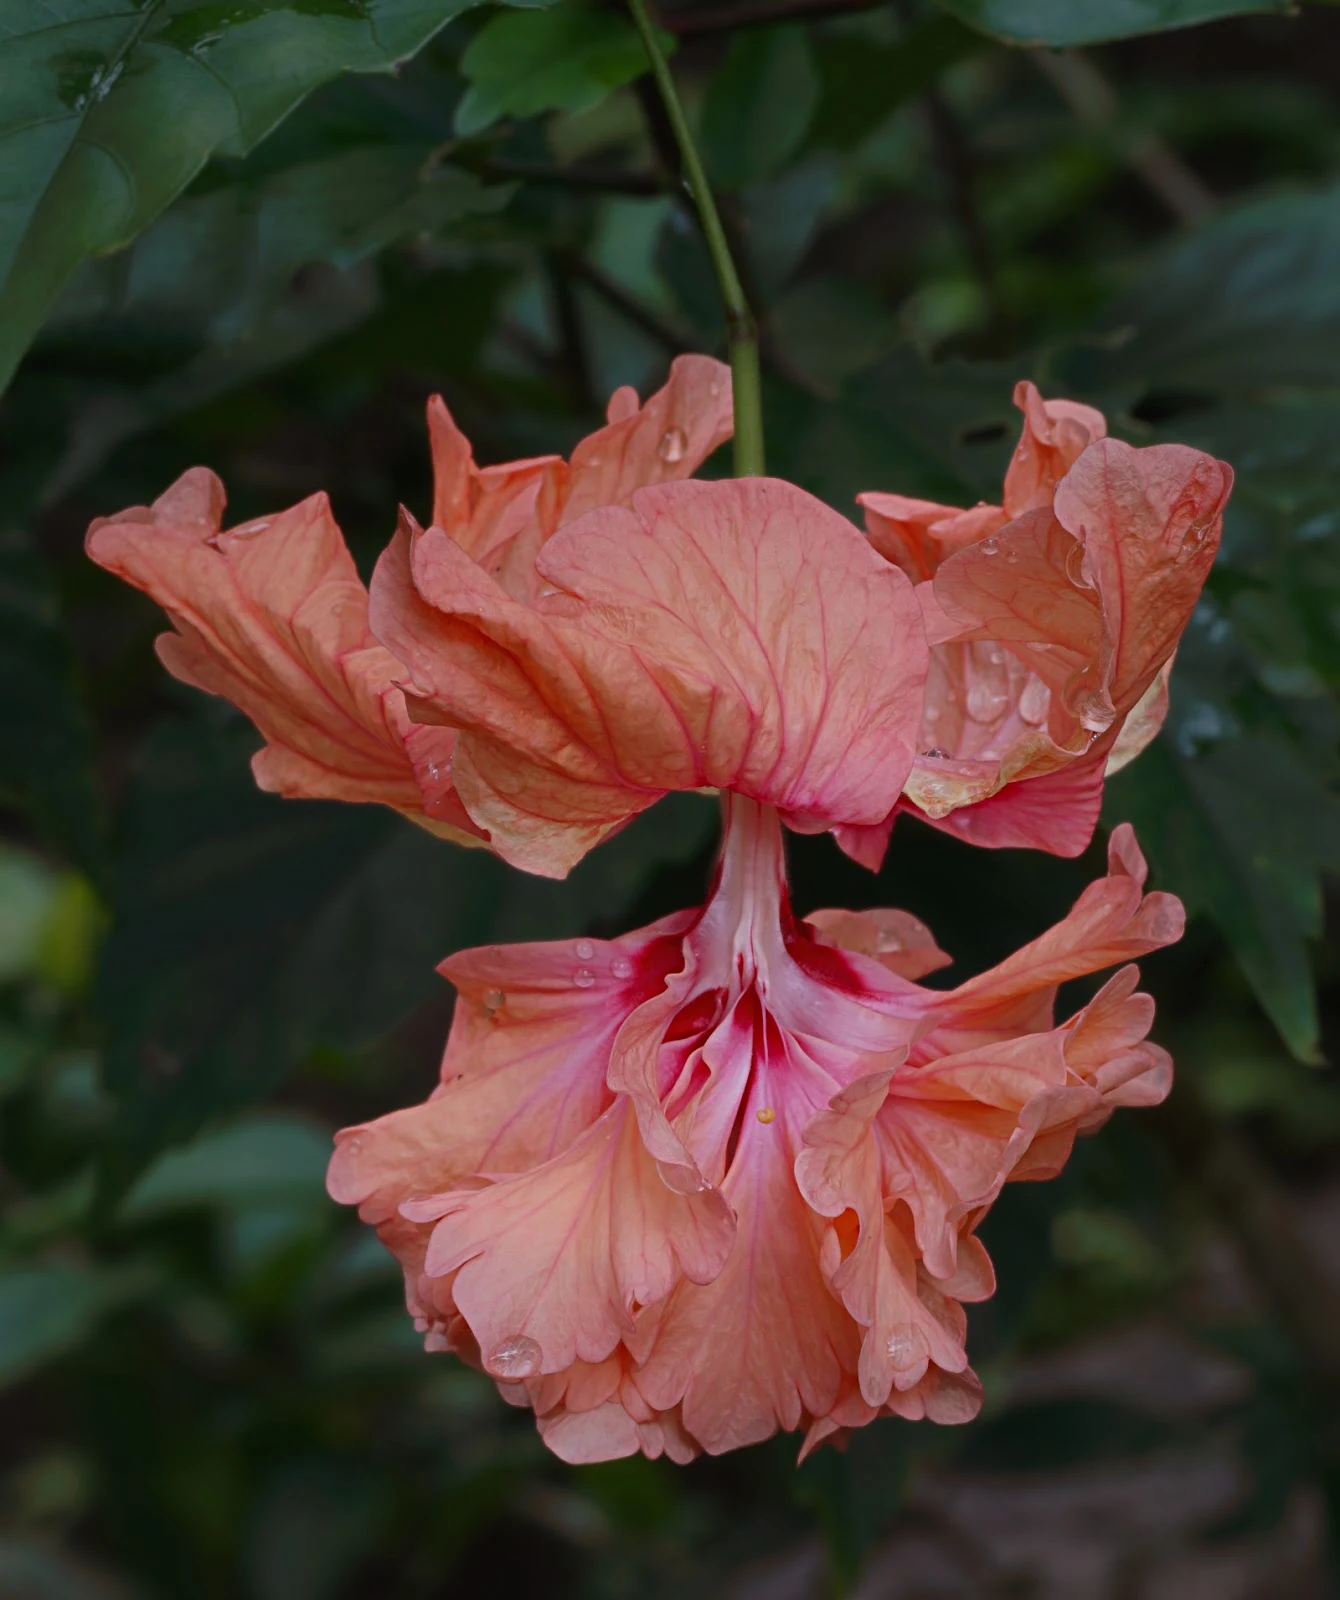 Compared to the first attempt this Hibiscus has more pop, more depth and a hint of 3D